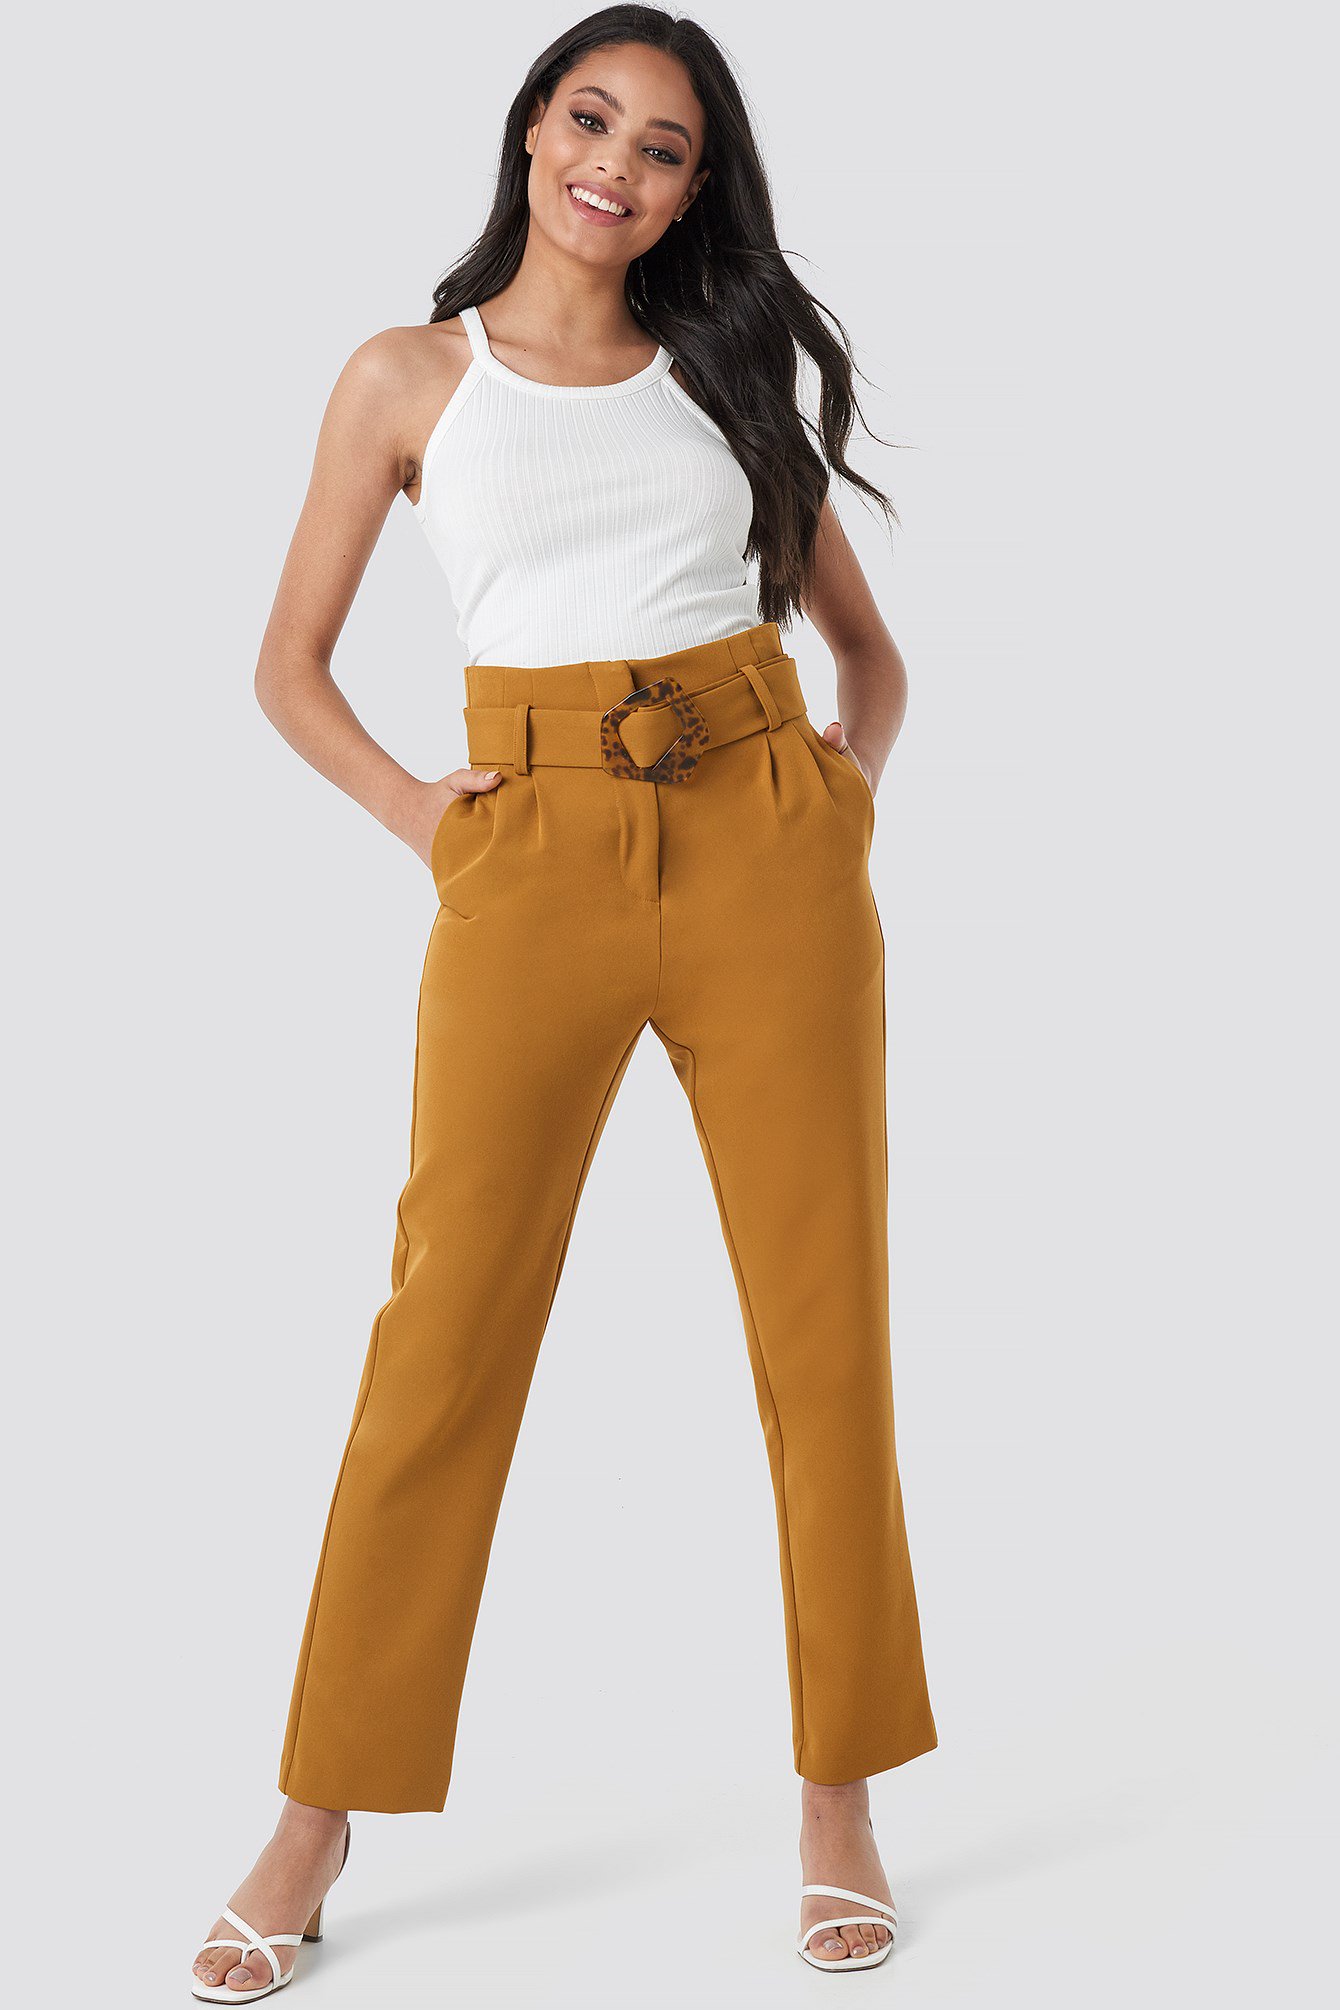 High Waist Asymmetric Belted Pants Outfit.